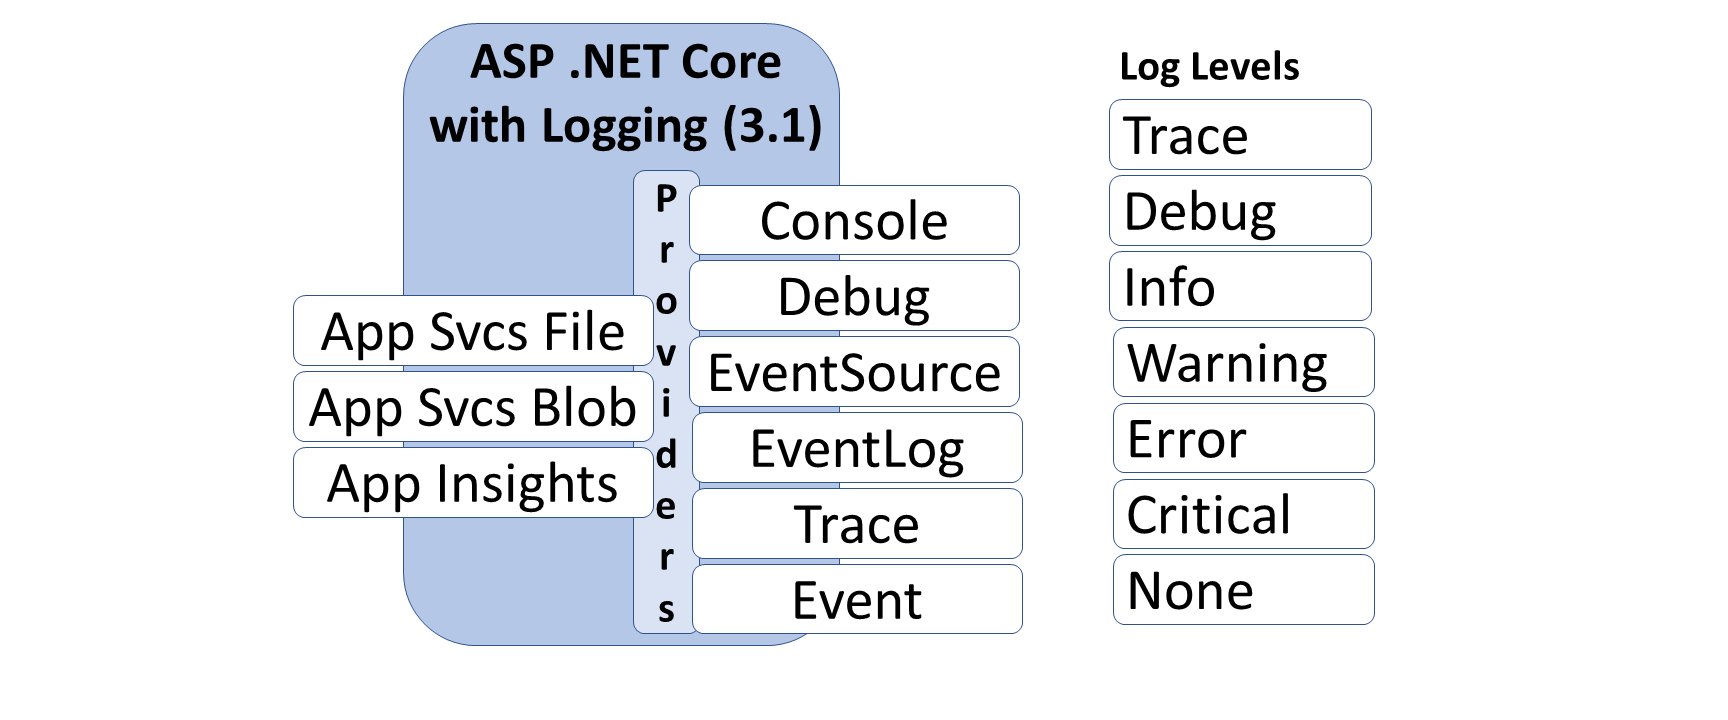 Setting Up Serilog In Asp Net Core Detailed Beginner Guide Pro Code A Step By To Logging Vrogue